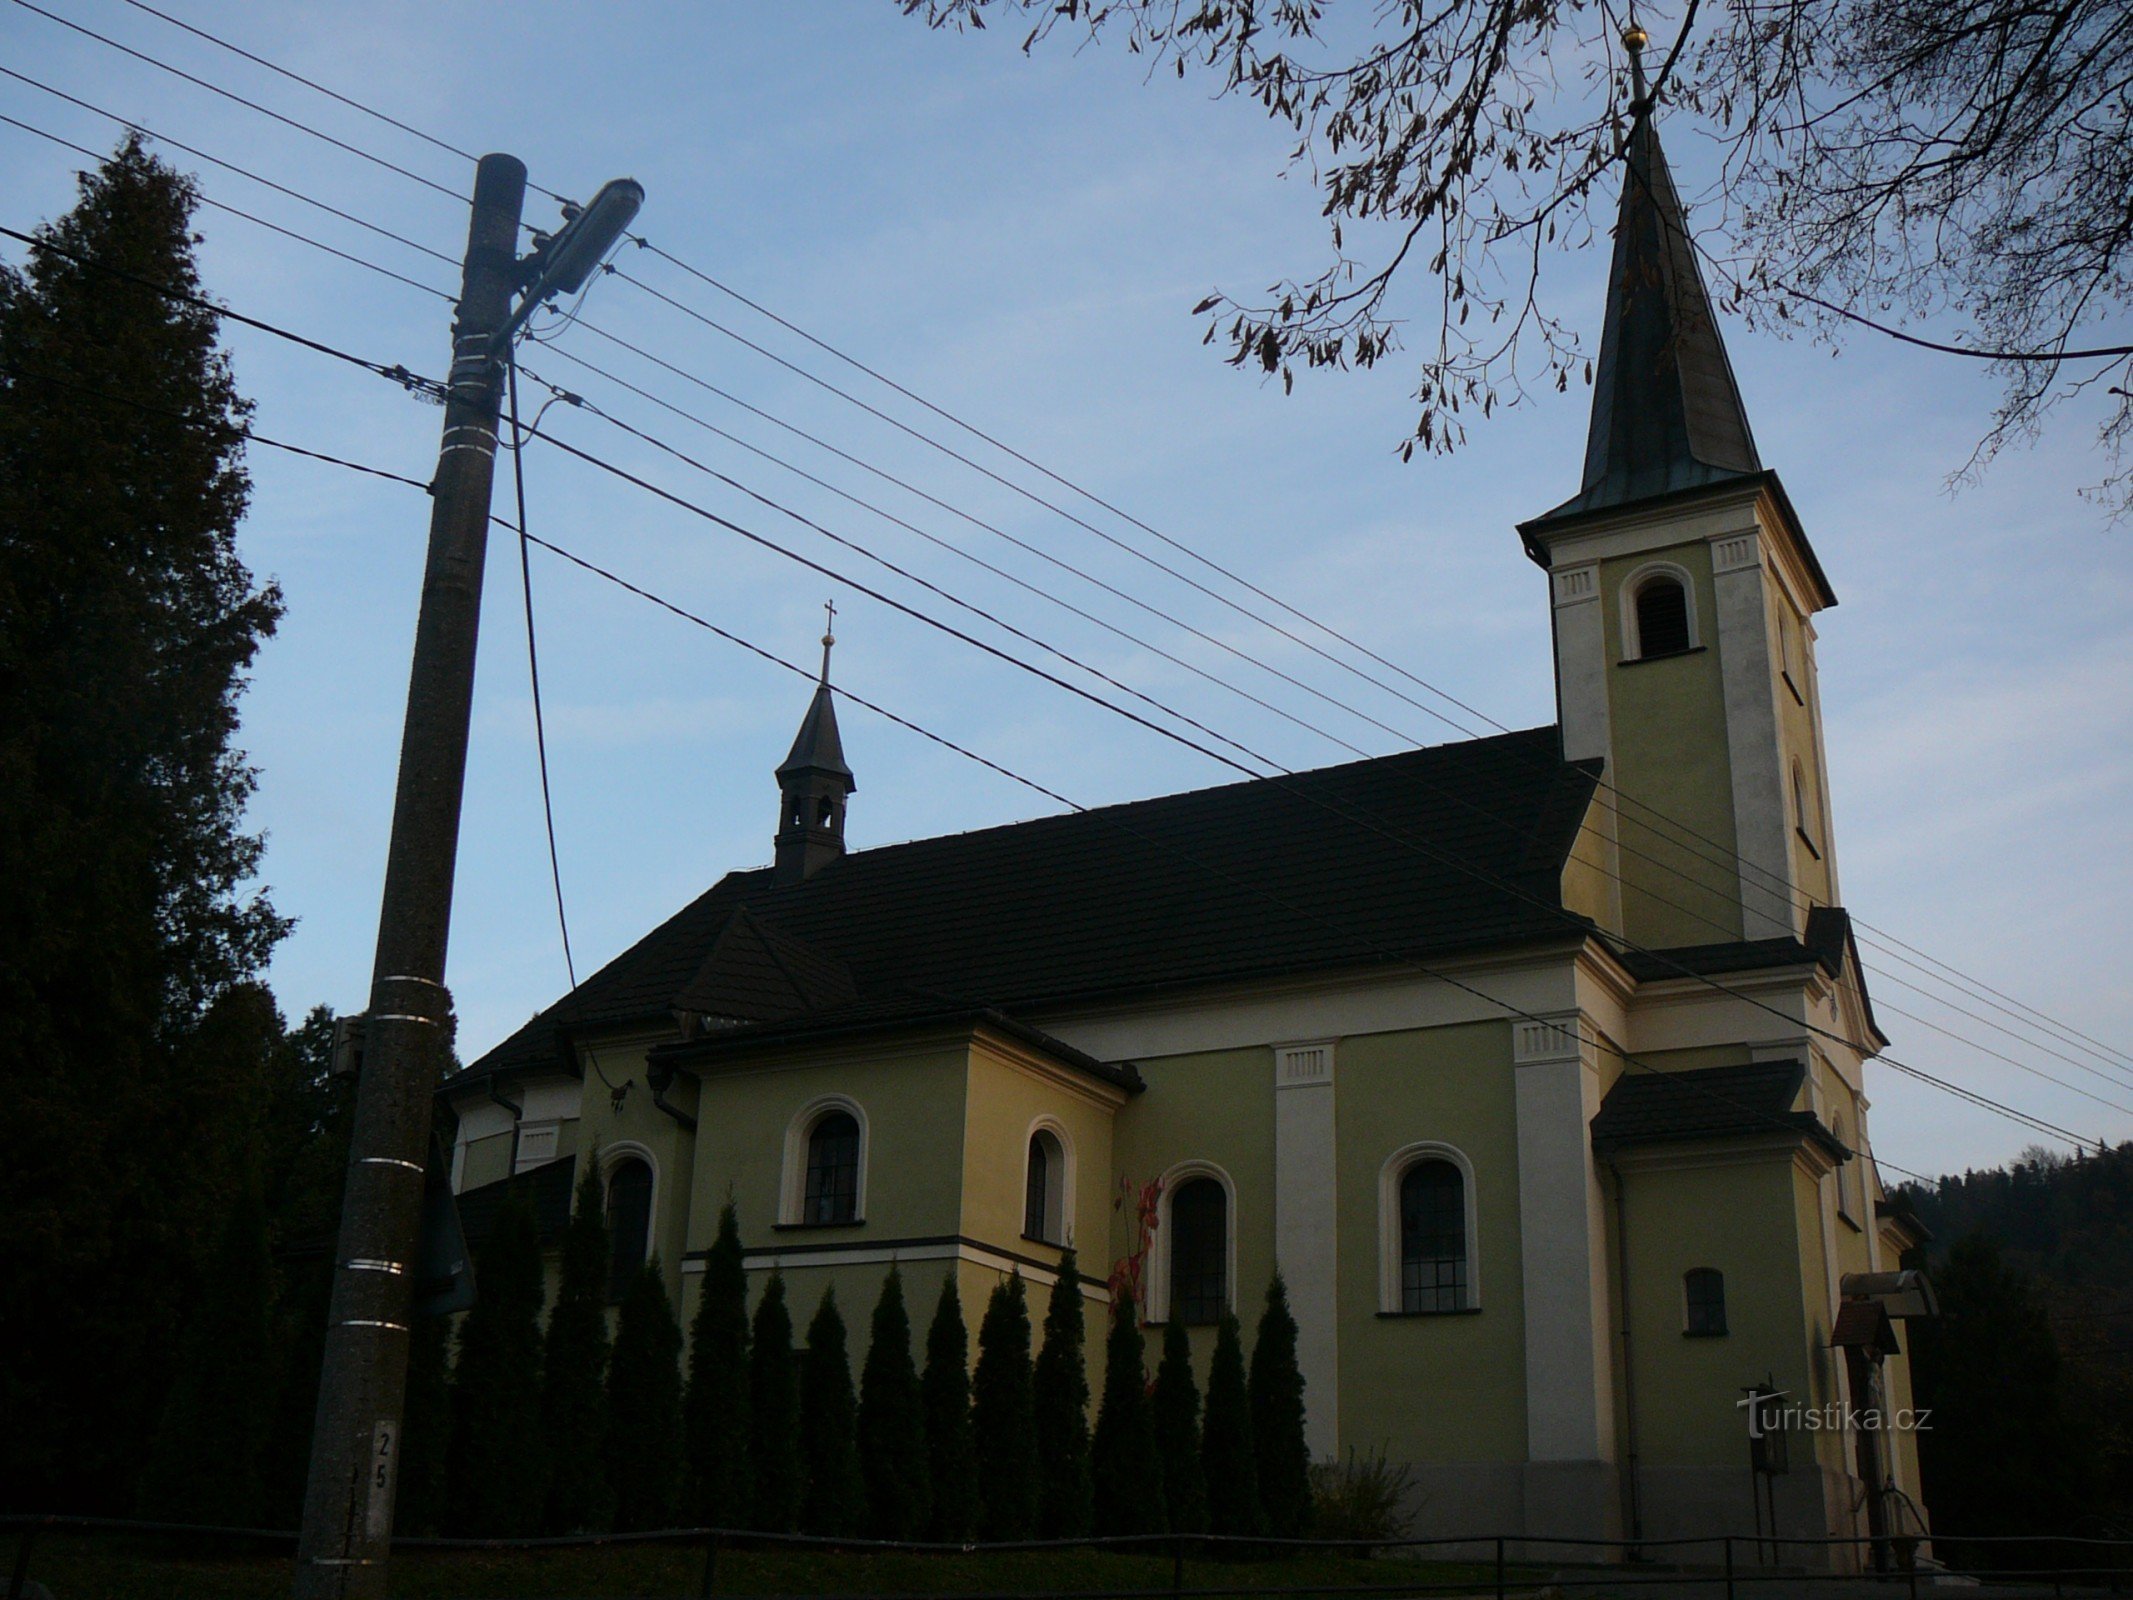 St. Cyril and Methodius in Chlebovice